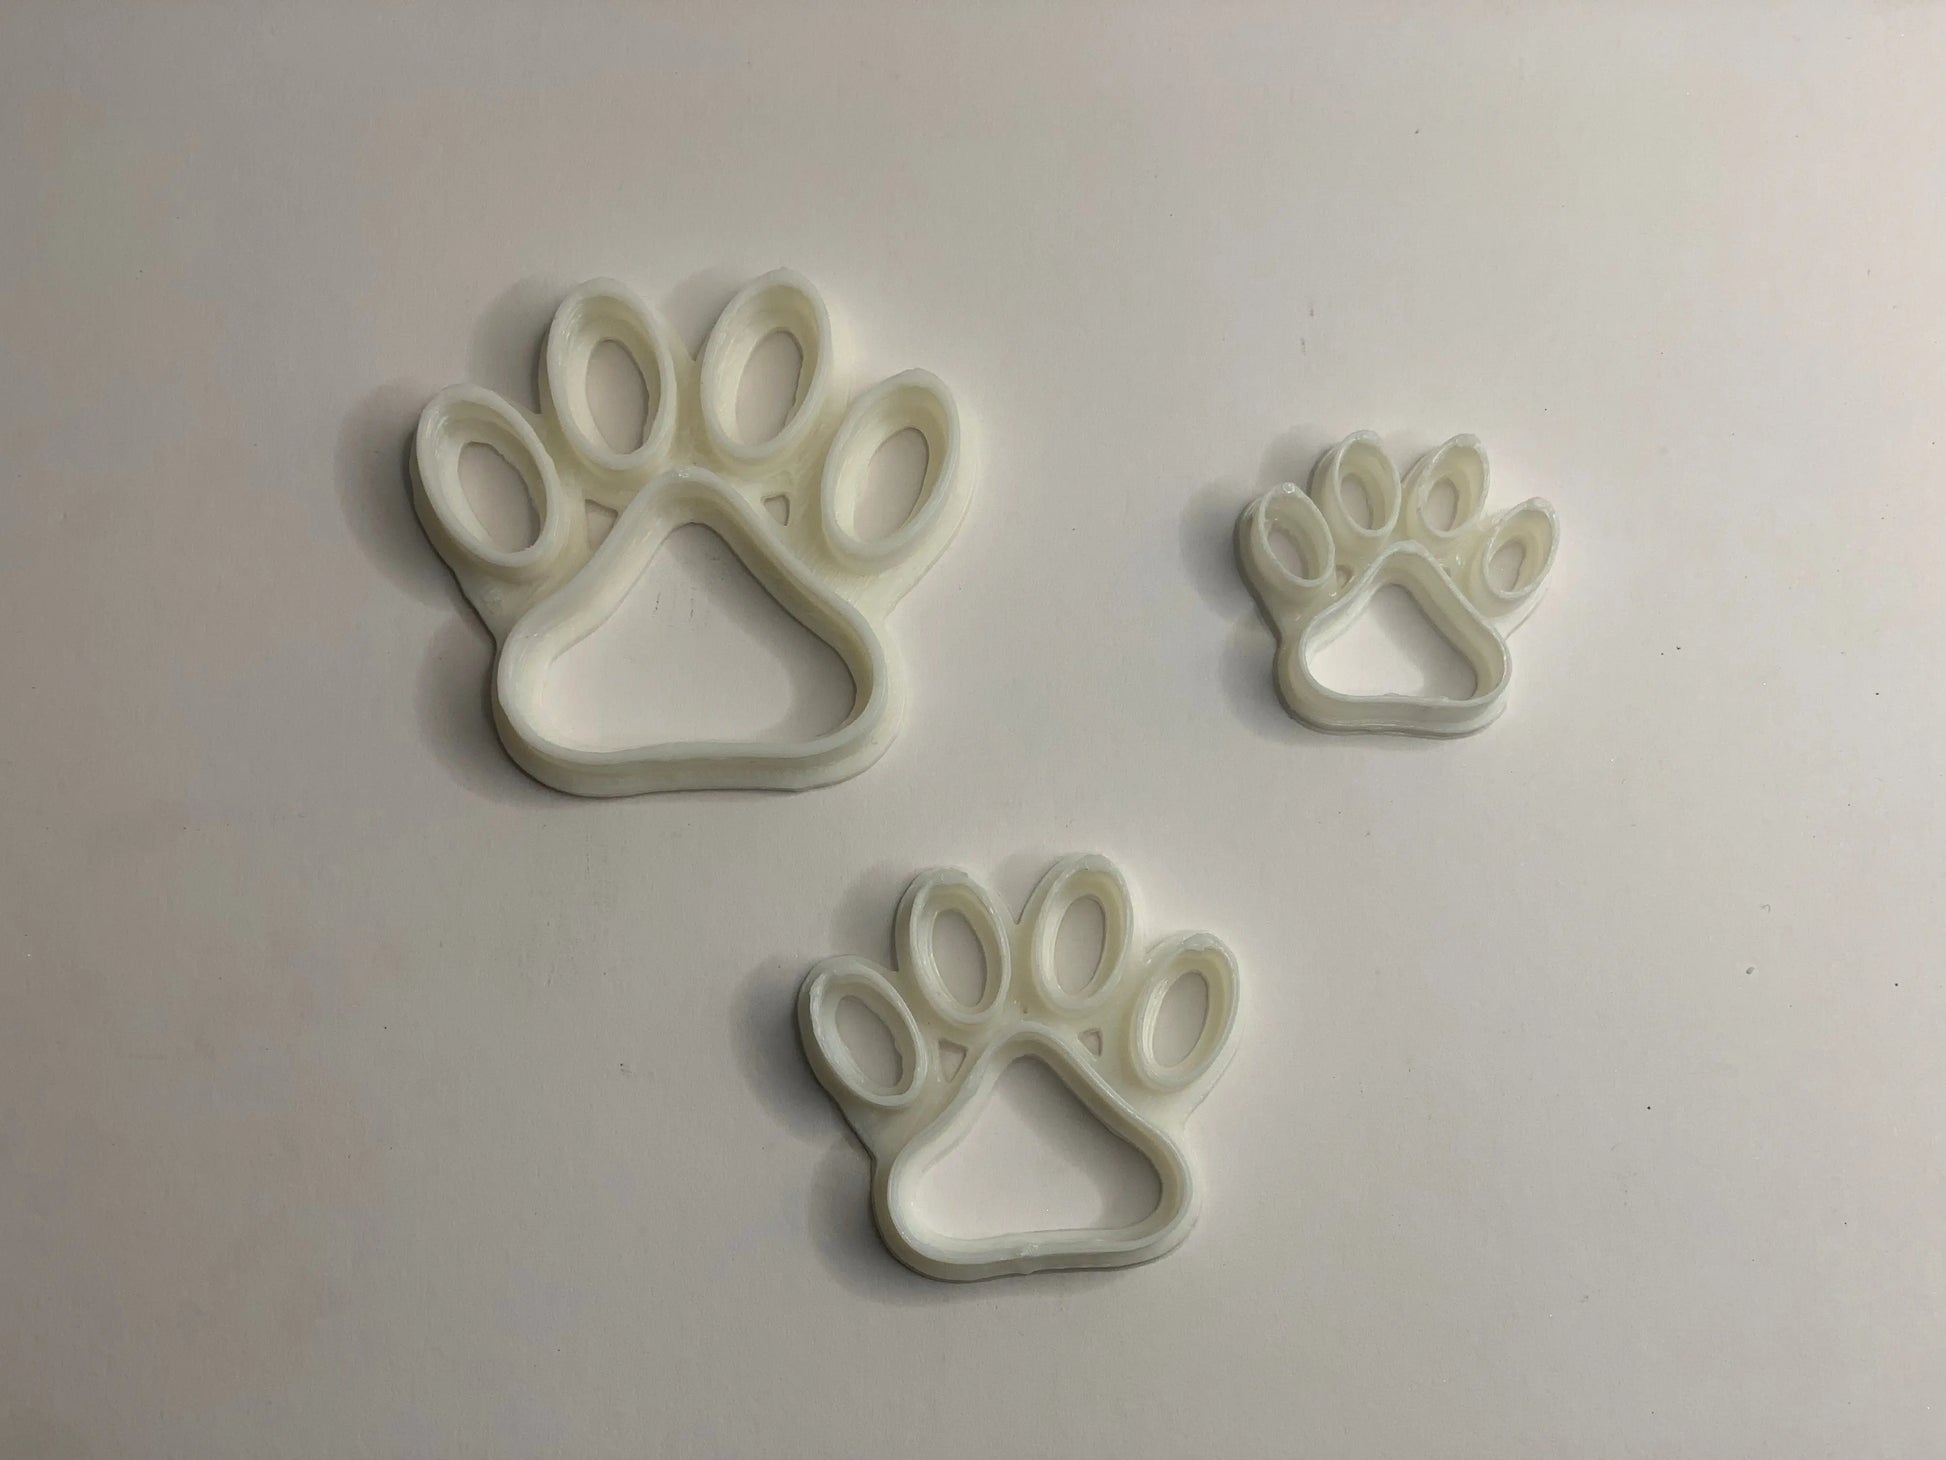 Paw print Cookie Cutter 3 size MEG cookie cutters